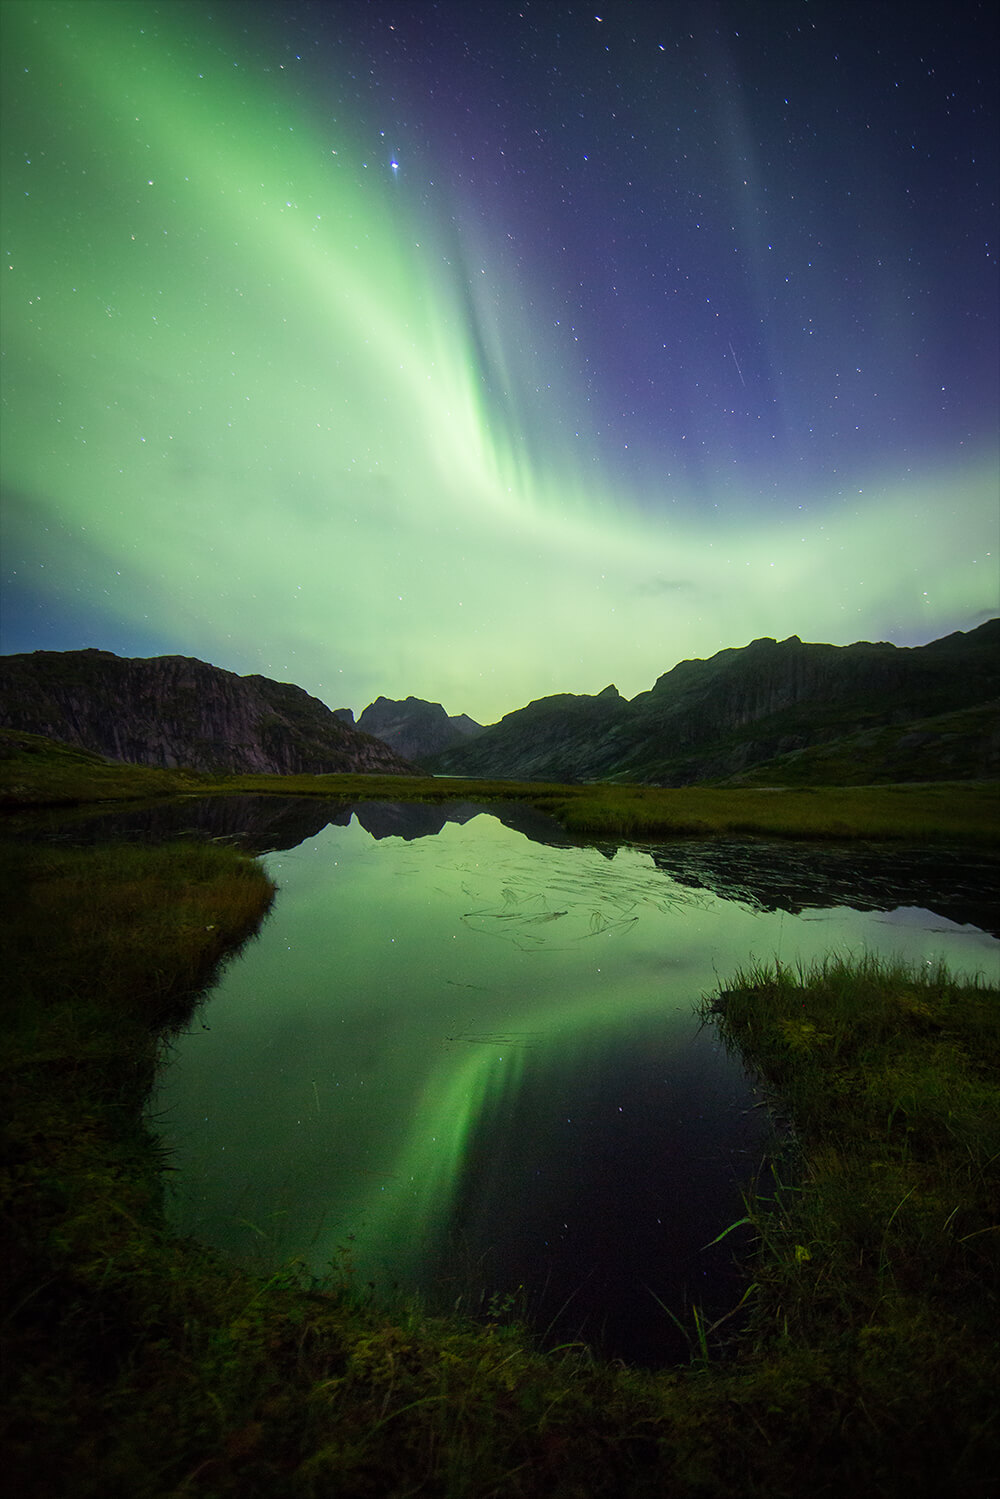 Image of the Northern Lights and its reflection on a lake. Photo by Neal Bloem